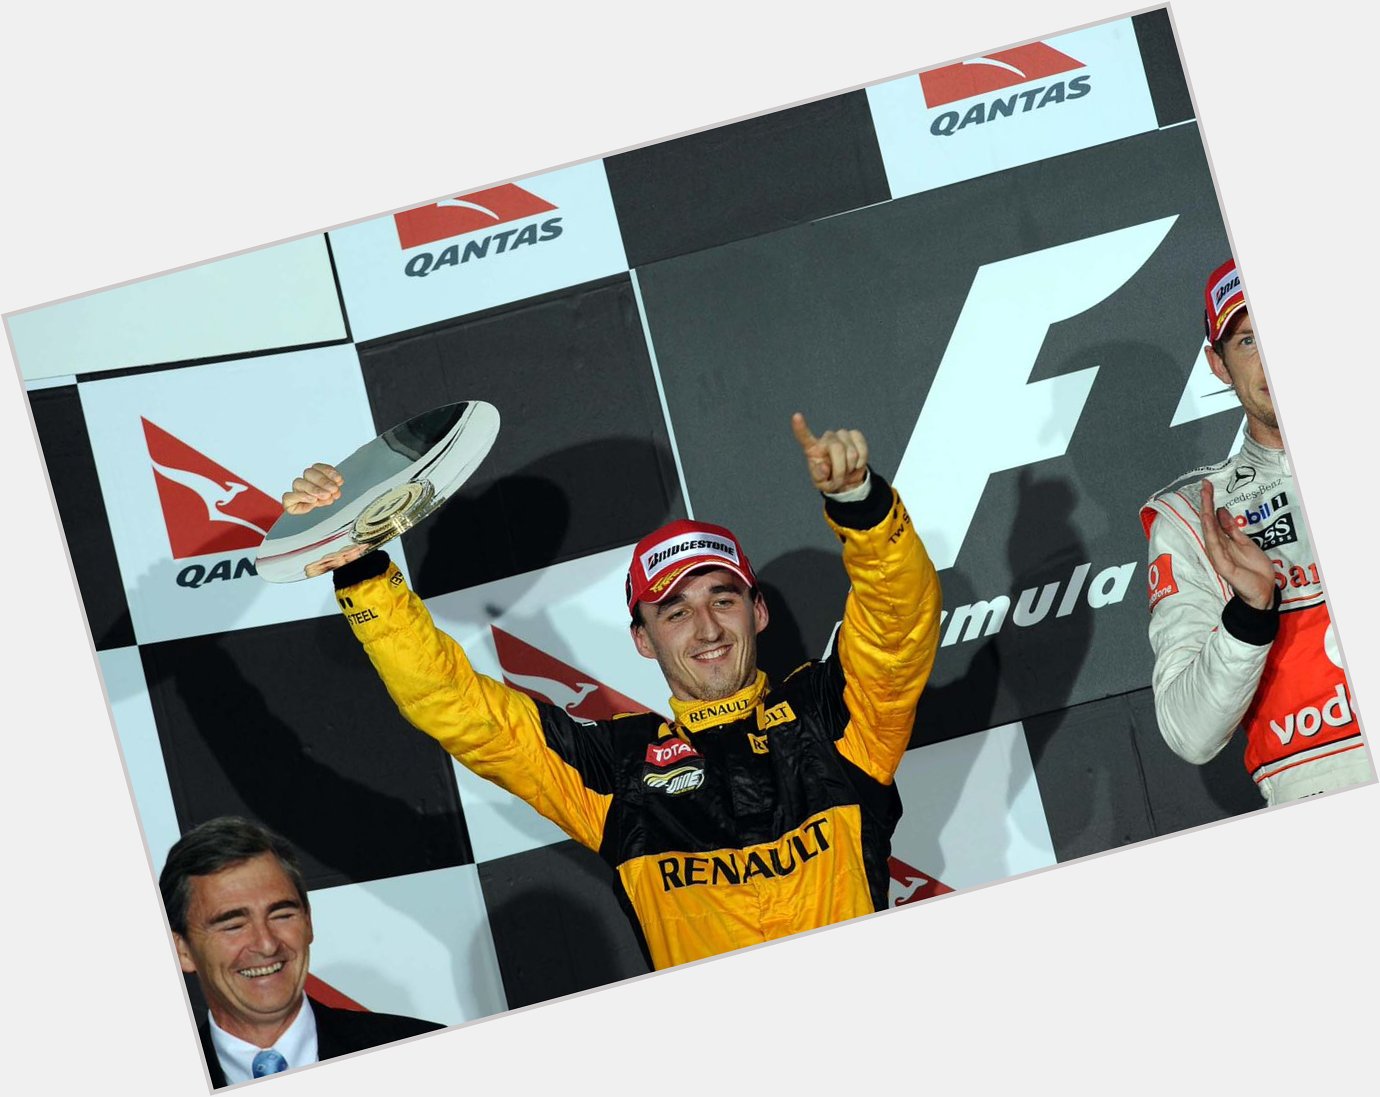 Happy Birthday to Robert Kubica! He surely would have been World Champion if his career was not ended early 